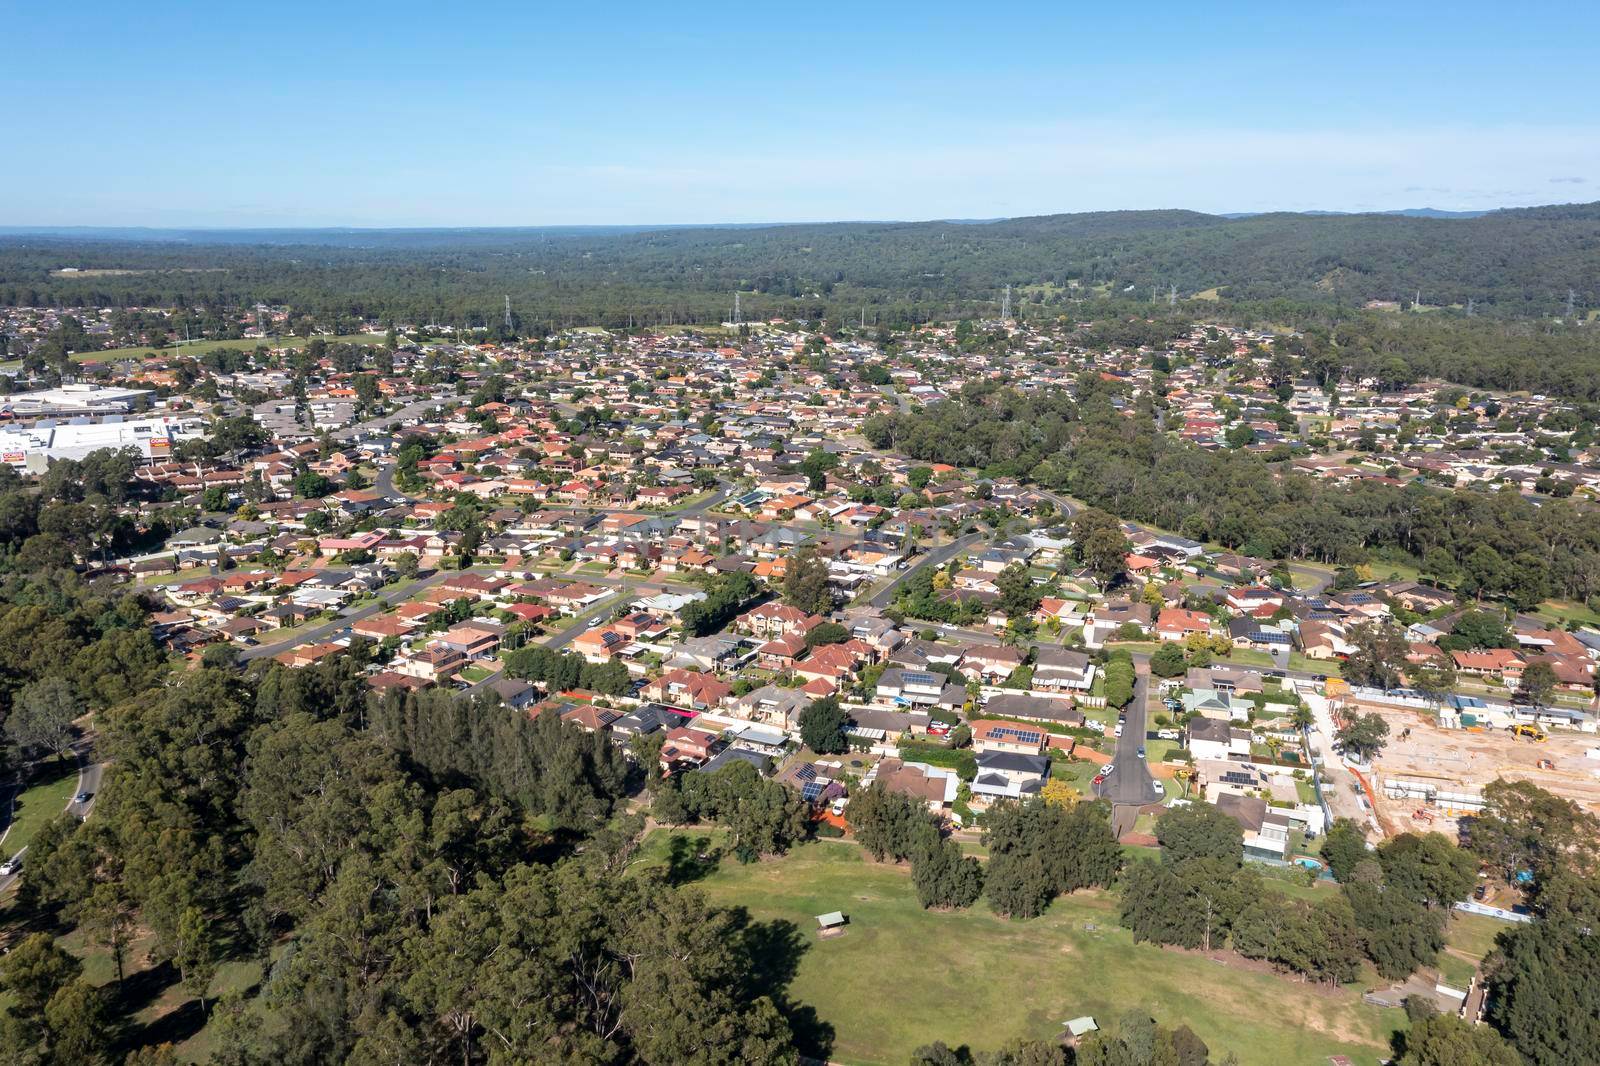 Aerial view of the suburb of Glenmore Park in greater Sydney in Australia by WittkePhotos